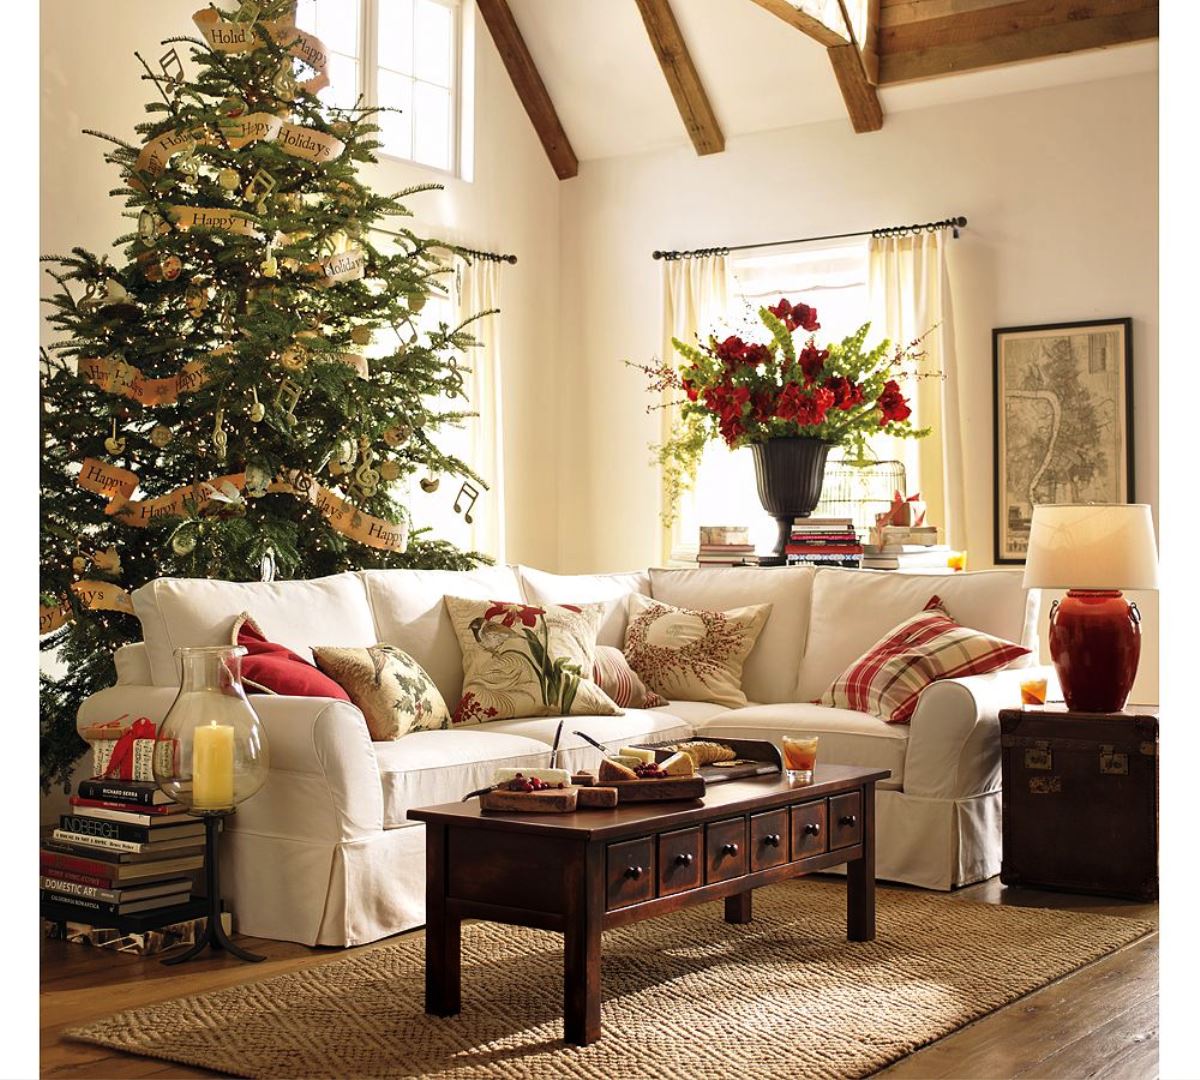 Green, red, and white Christmas decor